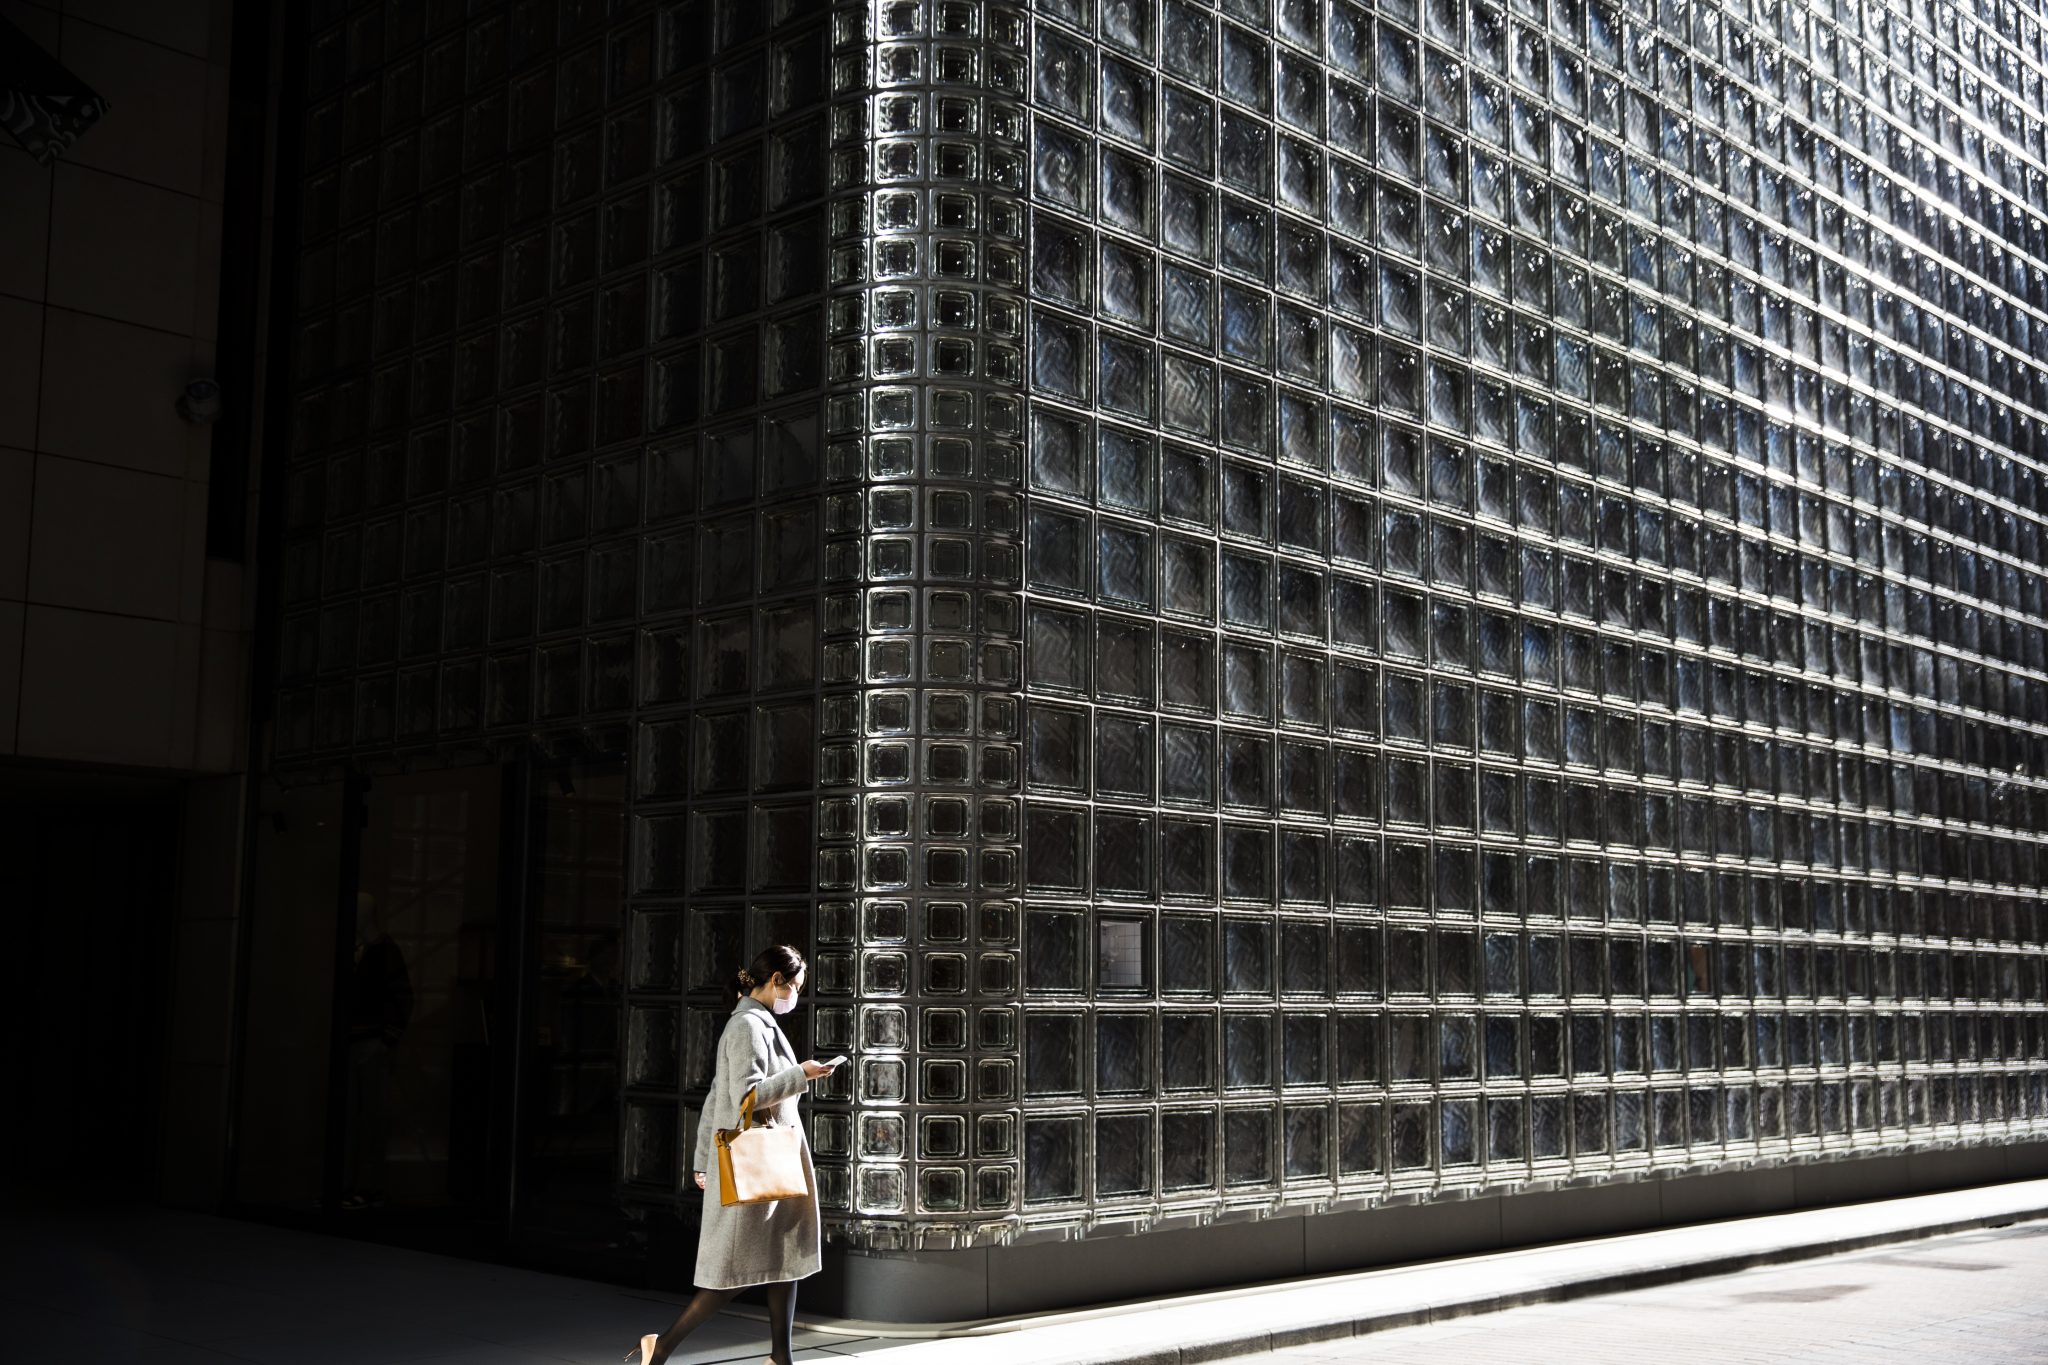 A woman walks out of the Maison Hermes building designed by Italian architect, Renzo piano, in the Ginza shopping district in Tokyo on February 13, 2017. Japan's economy expanded 1.0 percent in 2016 as a bump in exports and capital investment offset weak spending at home, data showed on February 13, 2017, although it was unlikely to erase concerns about Tokyo's faltering war on deflation. / AFP PHOTO / Behrouz MEHRI